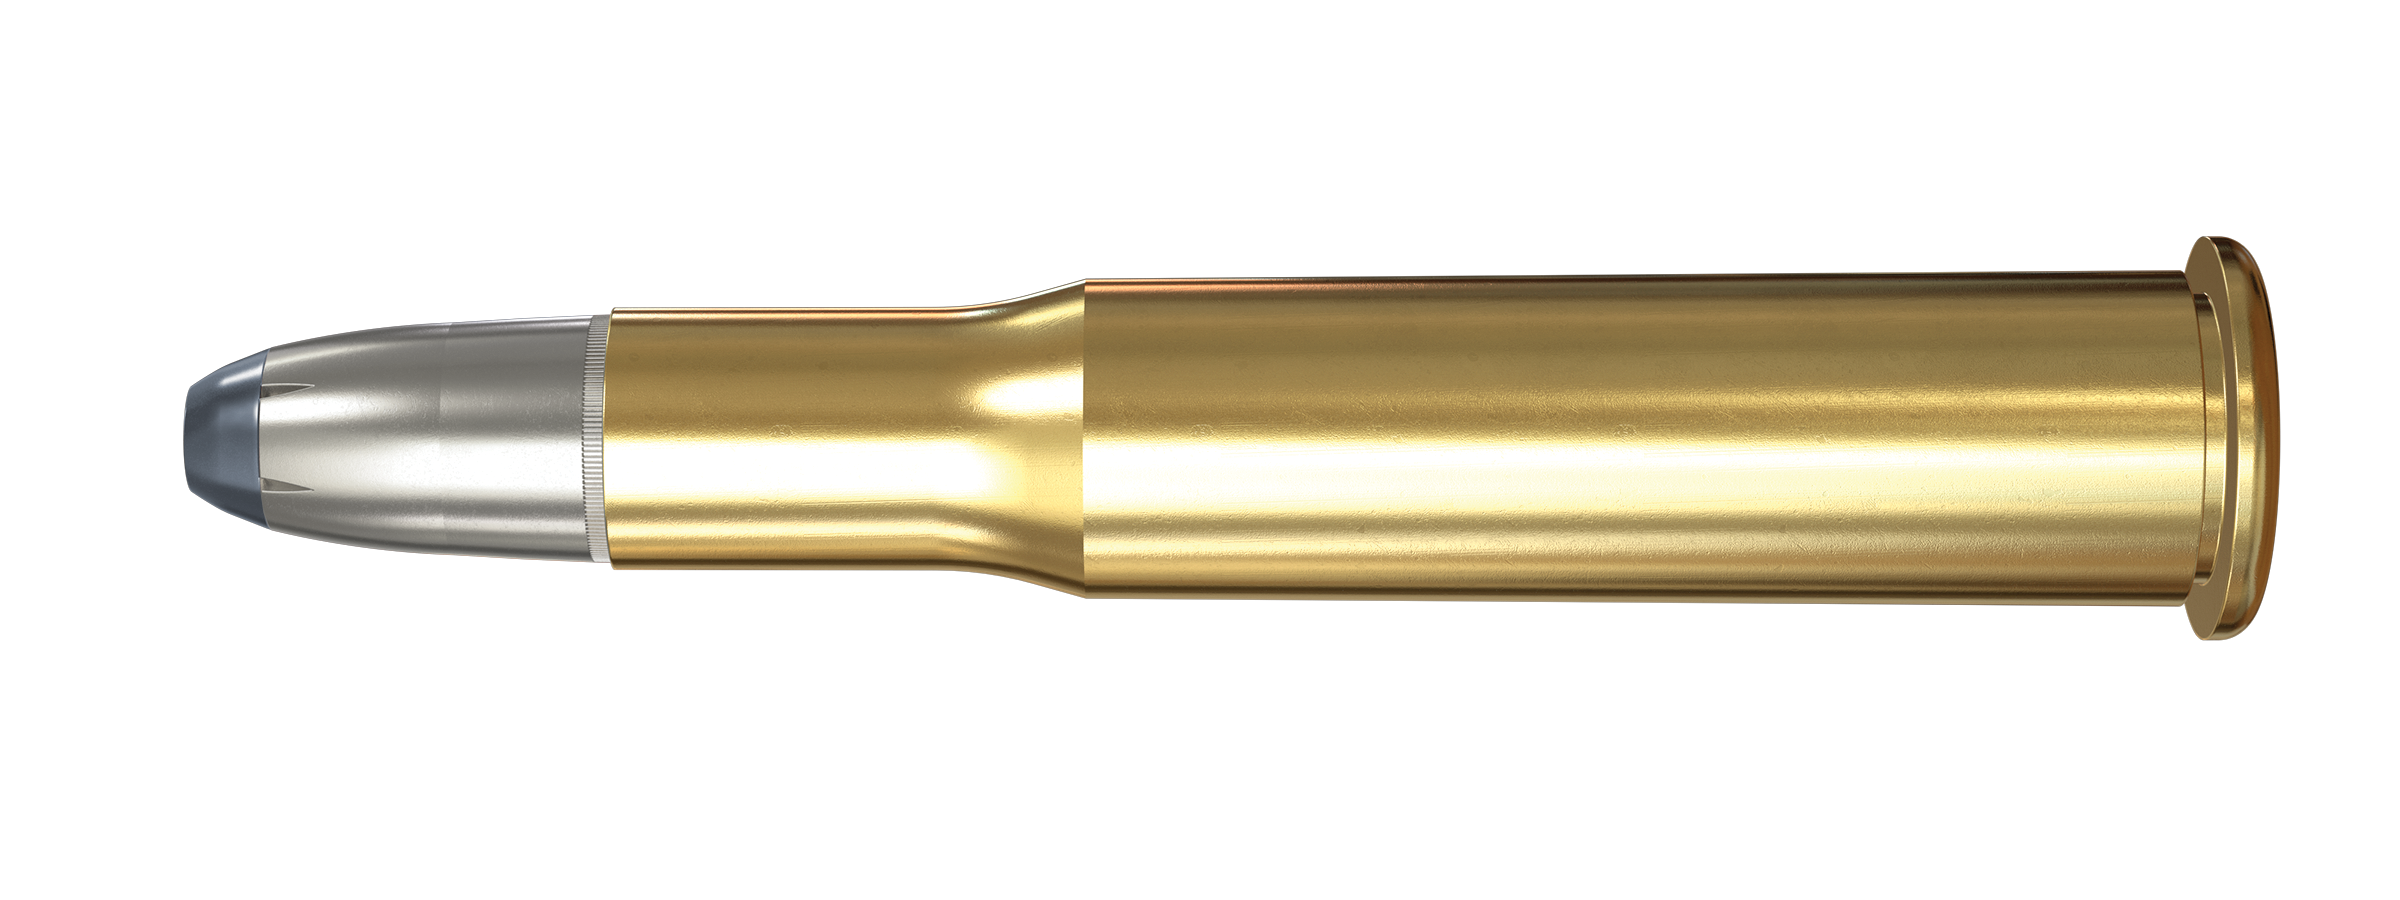 30-30 Winchester, 170 Grain Features